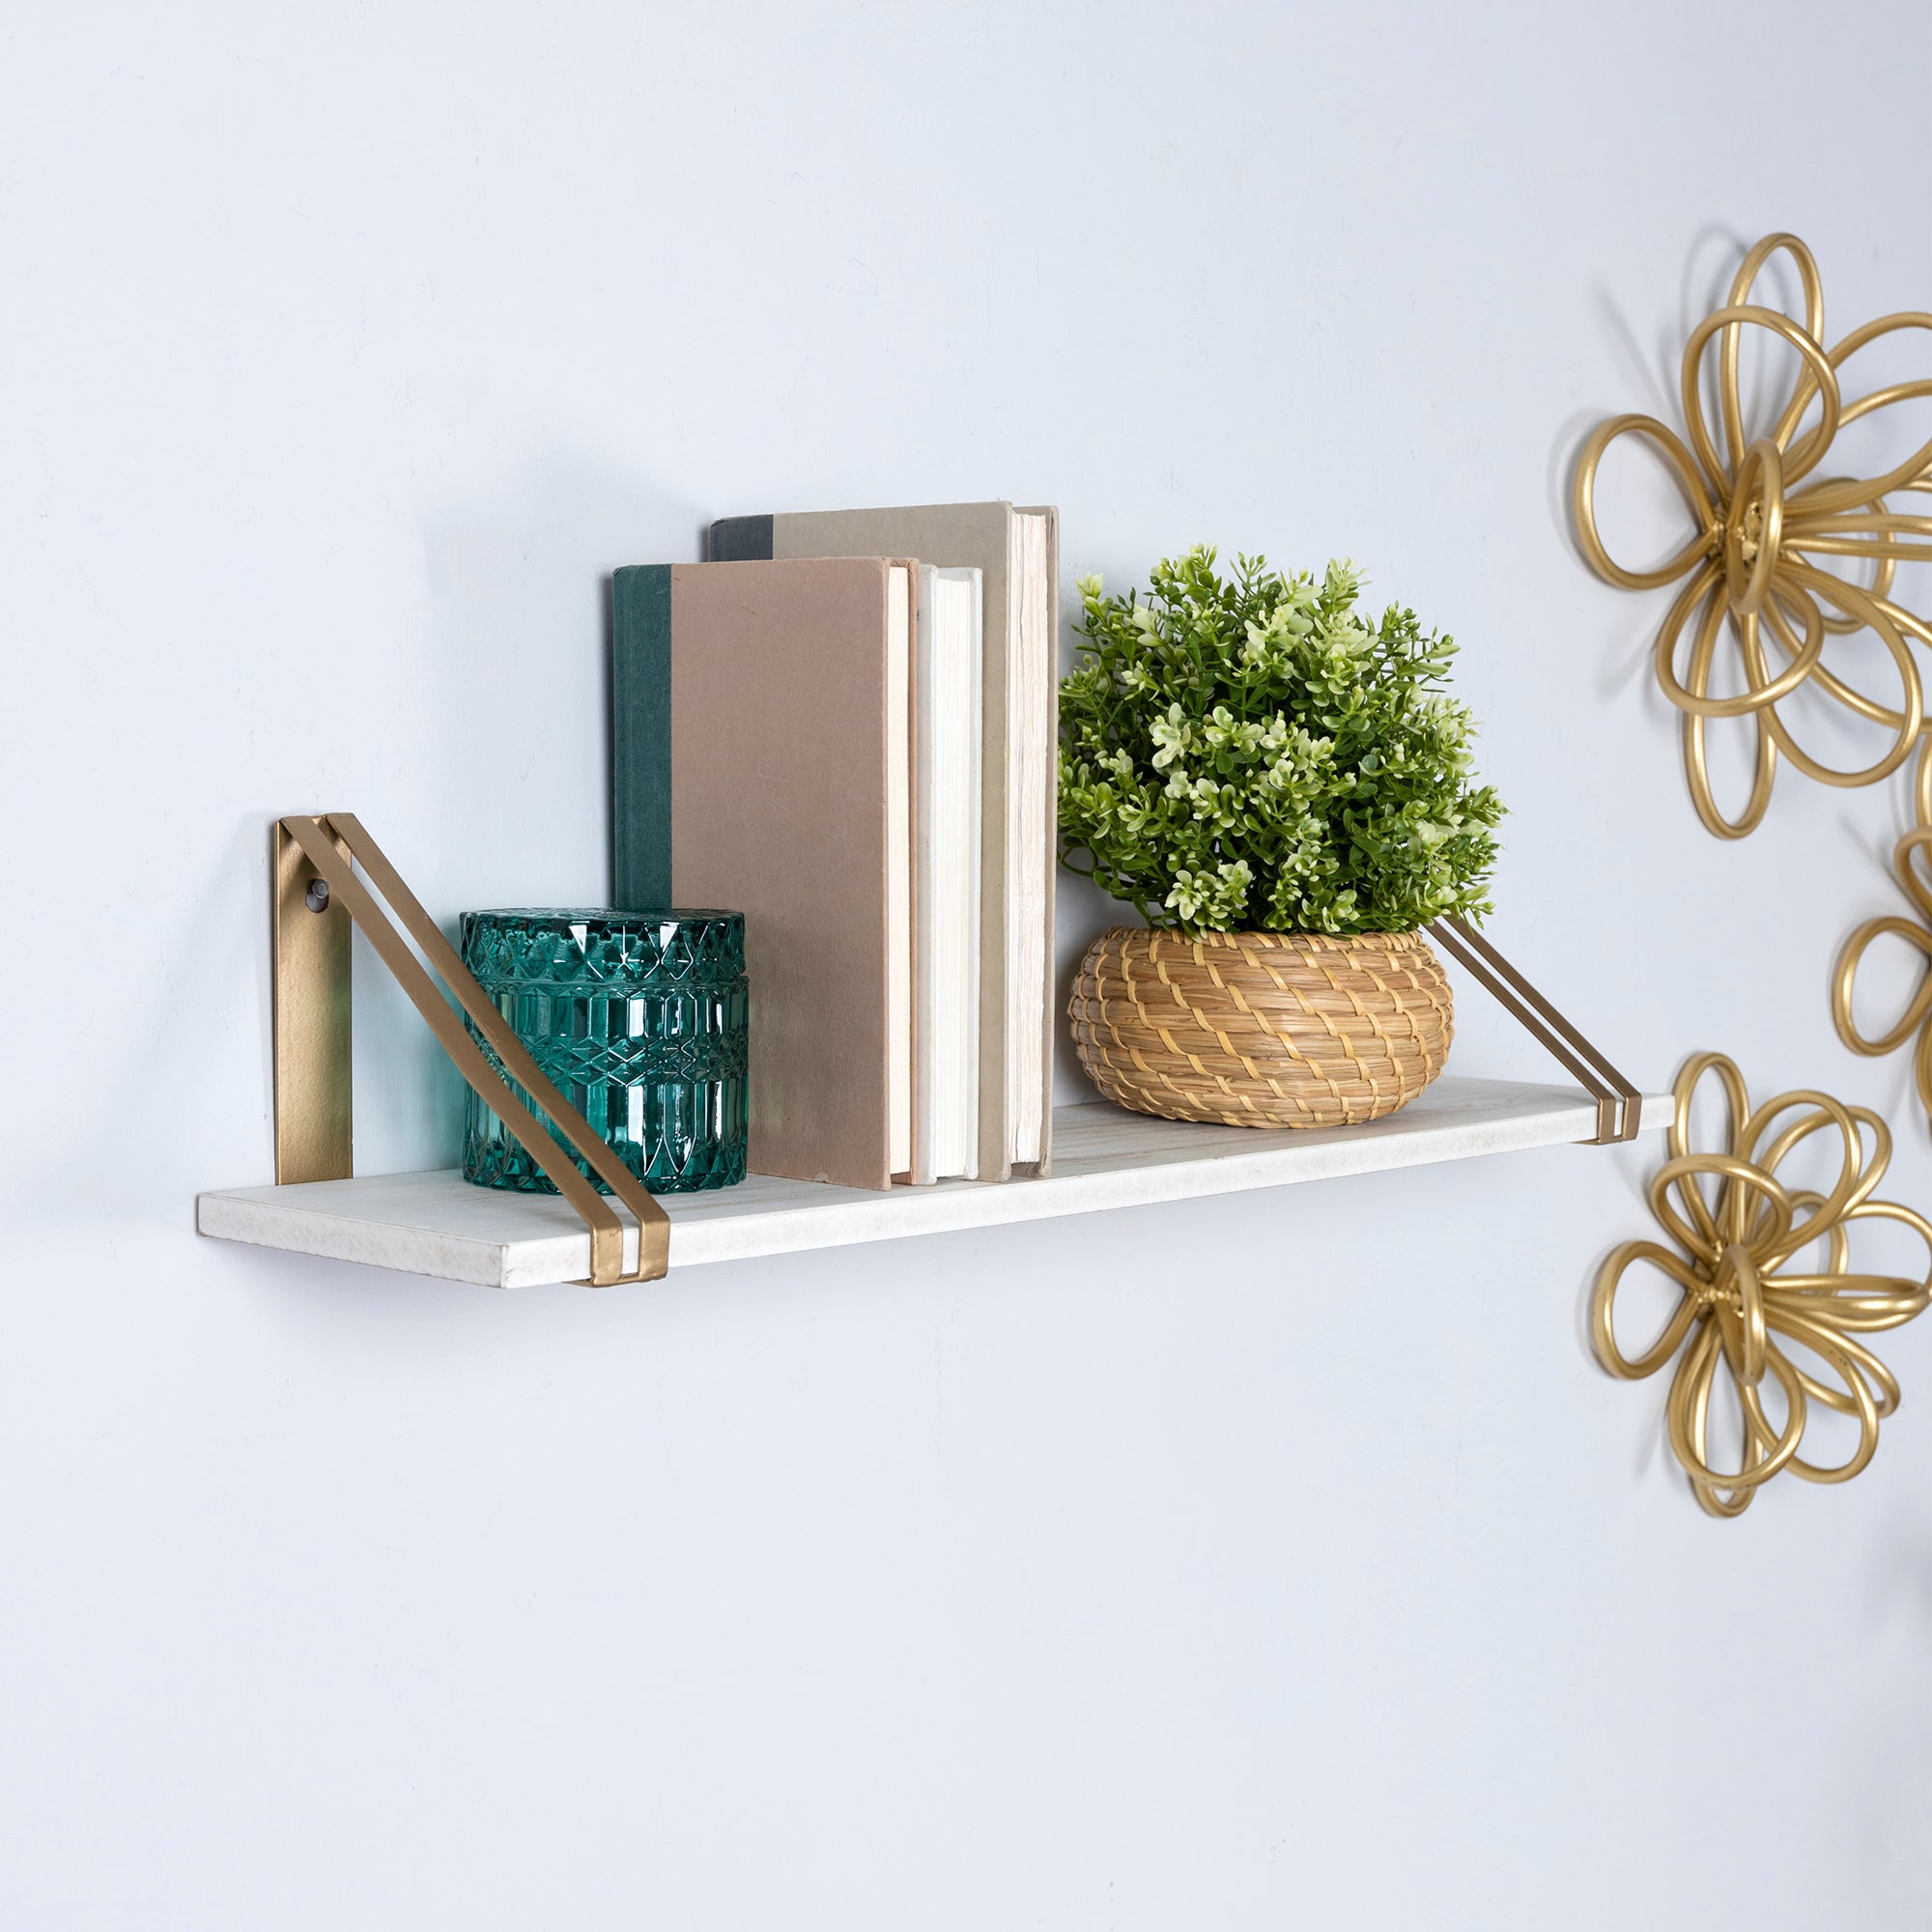 3 Tier Metal and Wood Wall Shelf – Decocrated